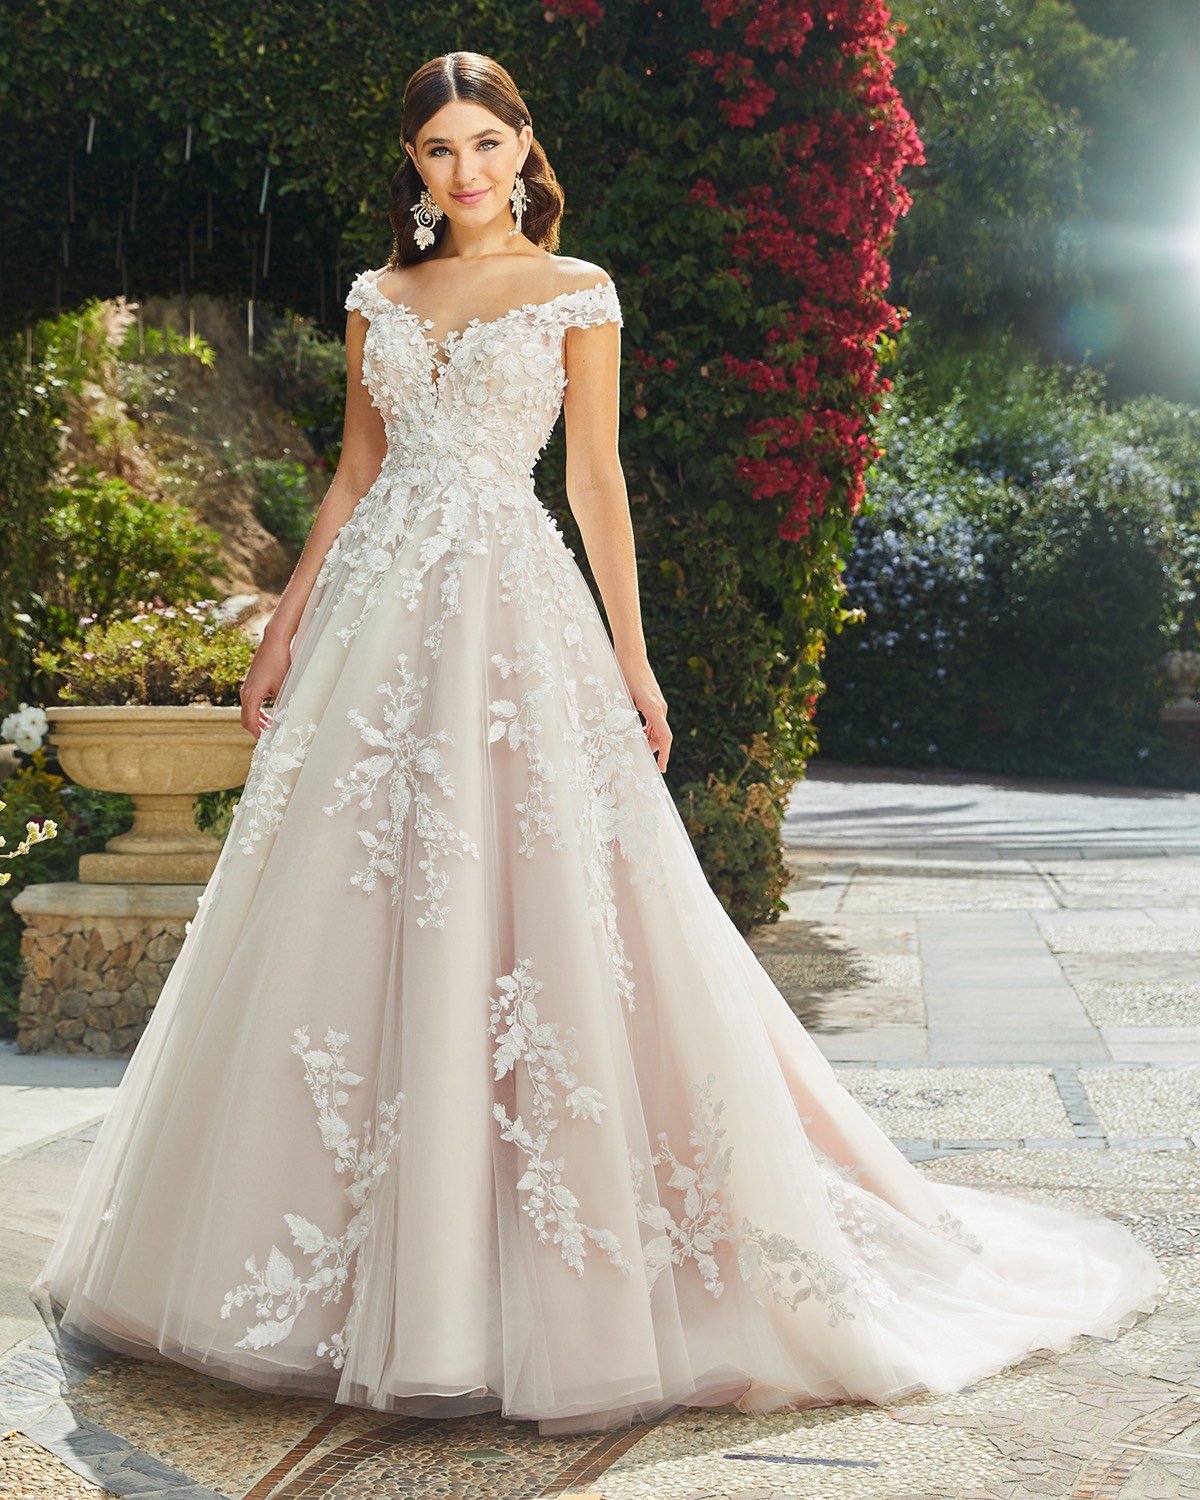 How & Where to Buy the Best Second Hand Wedding Dresses - hitched.co.uk